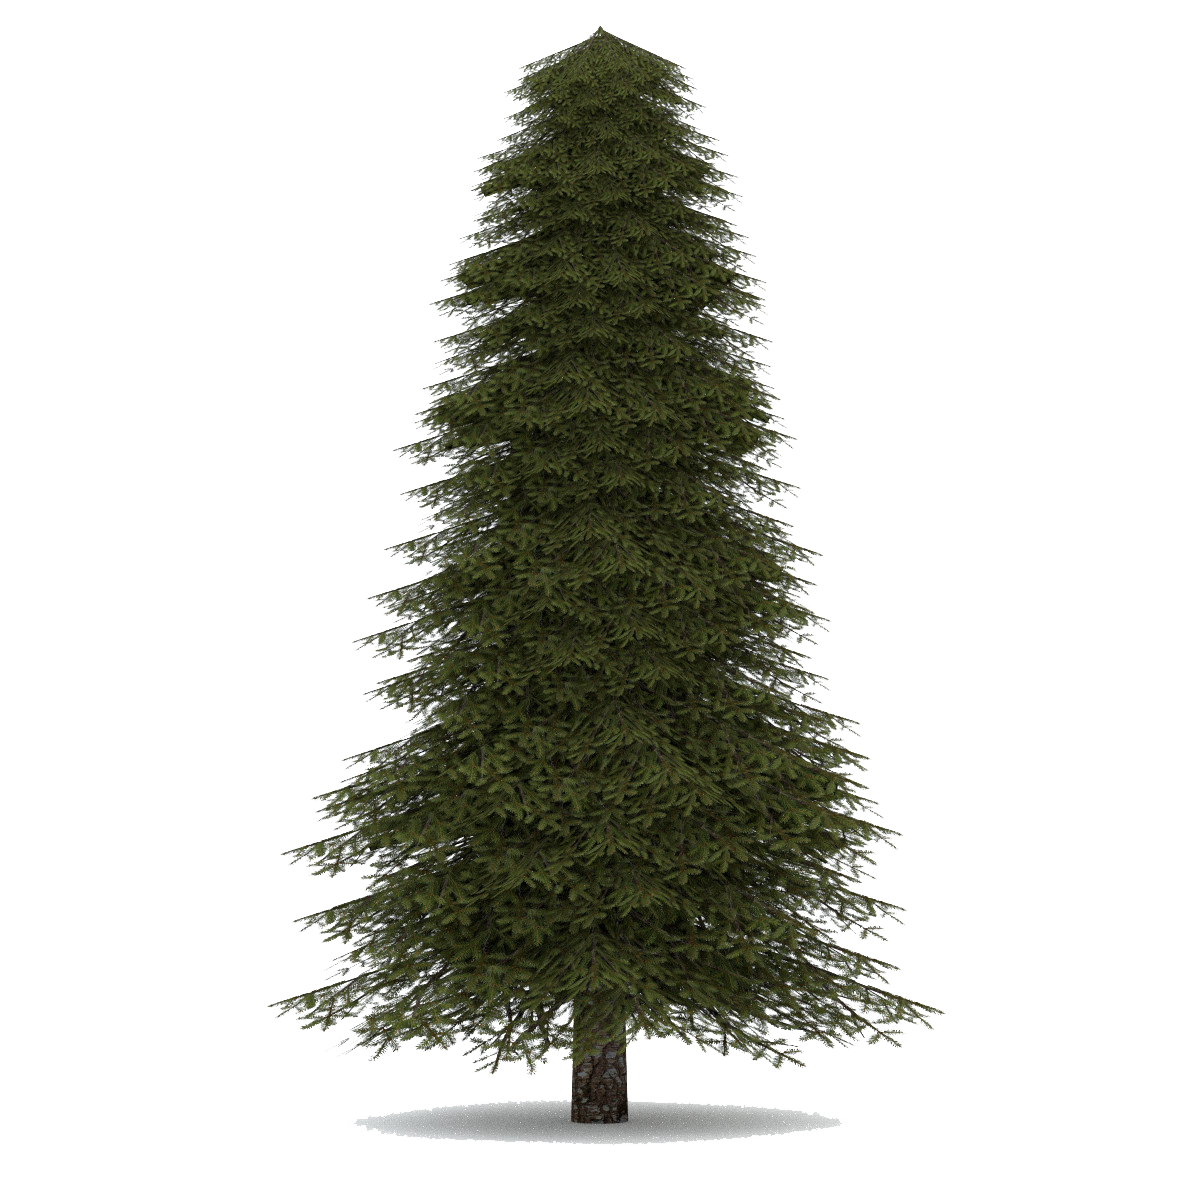 Download PNG image - Christmas Fir Tree PNG Background Image 